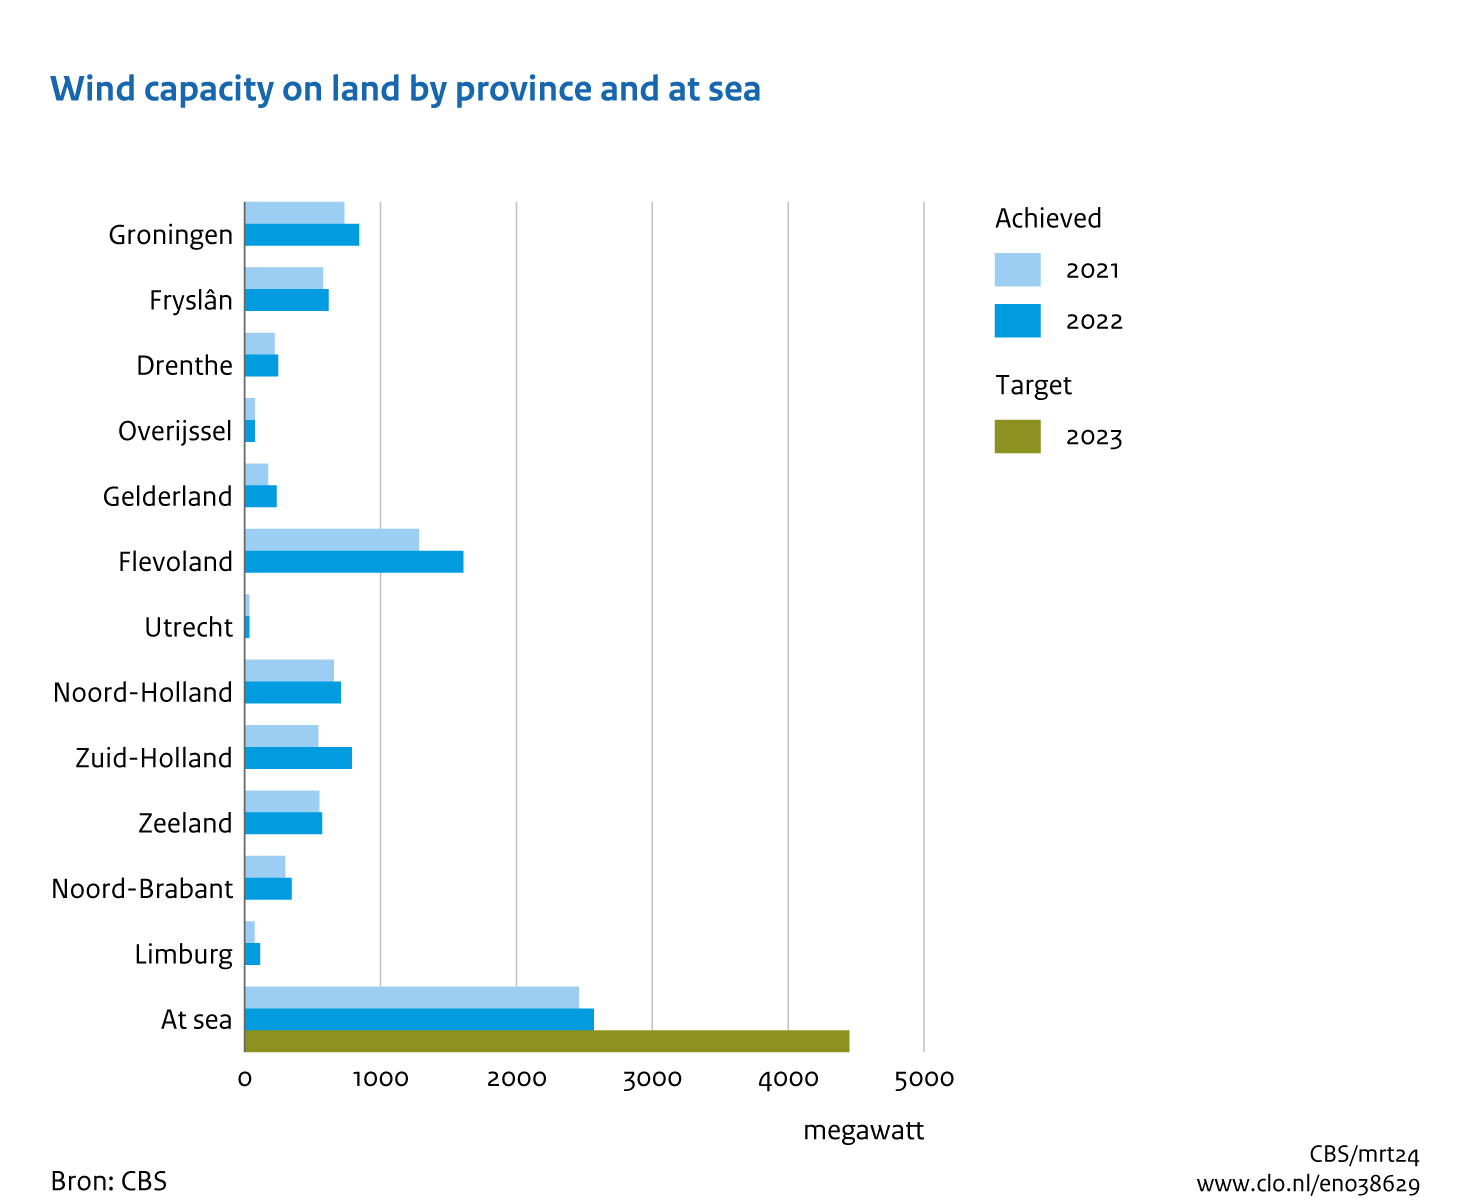 Bar graph showing the installed wind energy capacity in megawatts per province at the end of 2021 and the end of 2022. Plus the target for offshore capacity in 2023. The installed capacity is highest at sea and in Flevoland; lowest in Utrecht and Overijssel. Wind energy capacity has increased the most in Flevoland, Zuid-Holland and Groningen in the past year.